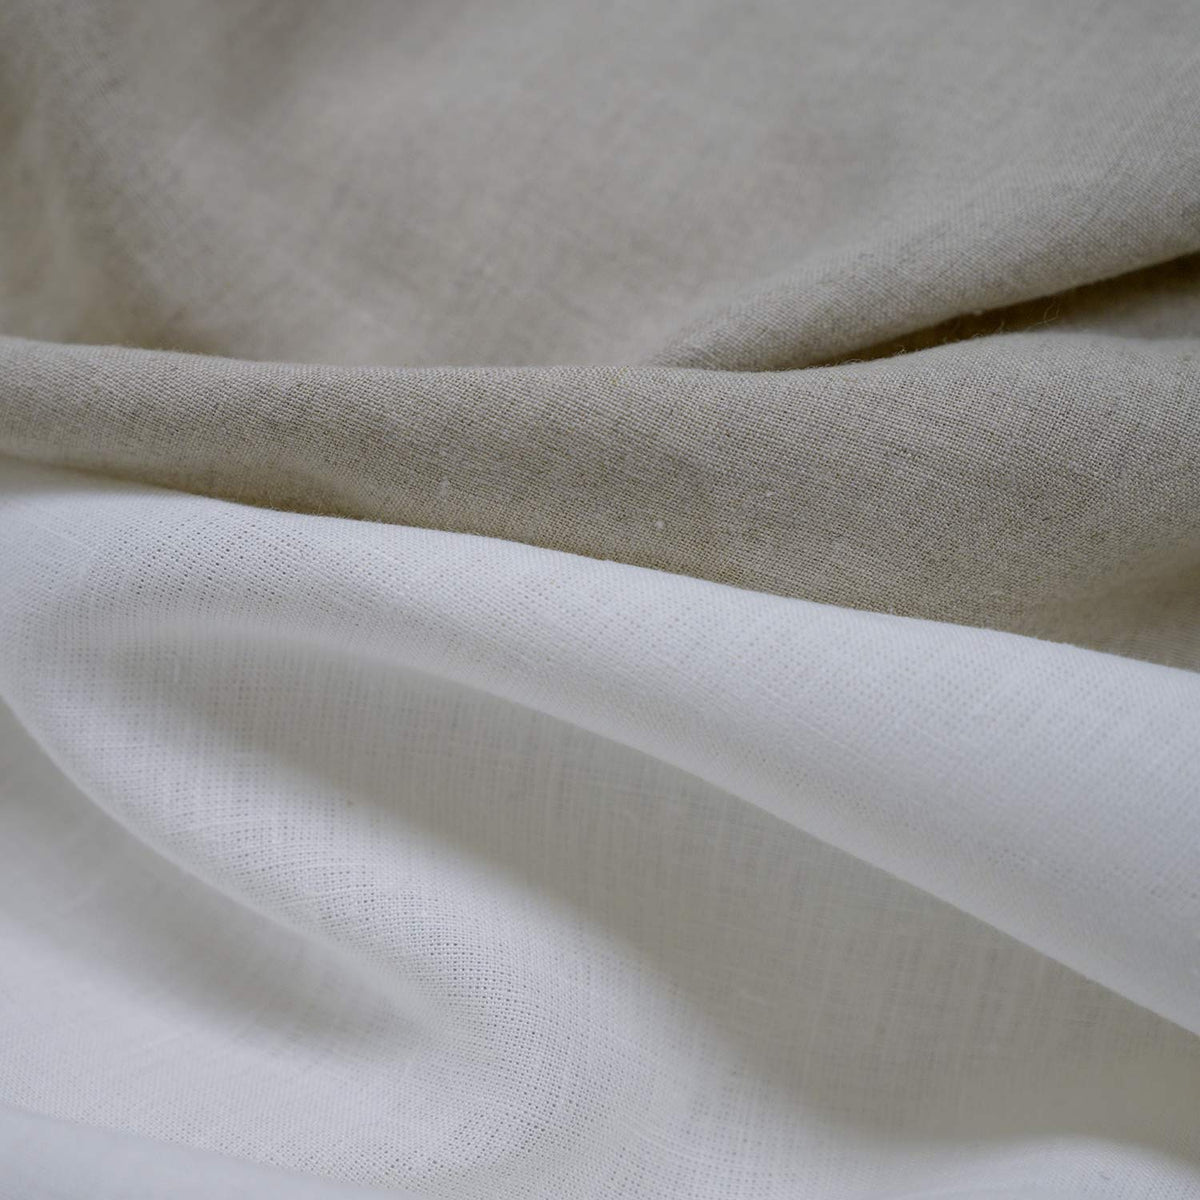 100% Organic Cotton Canvas Fabric By Rawganique Since 1997